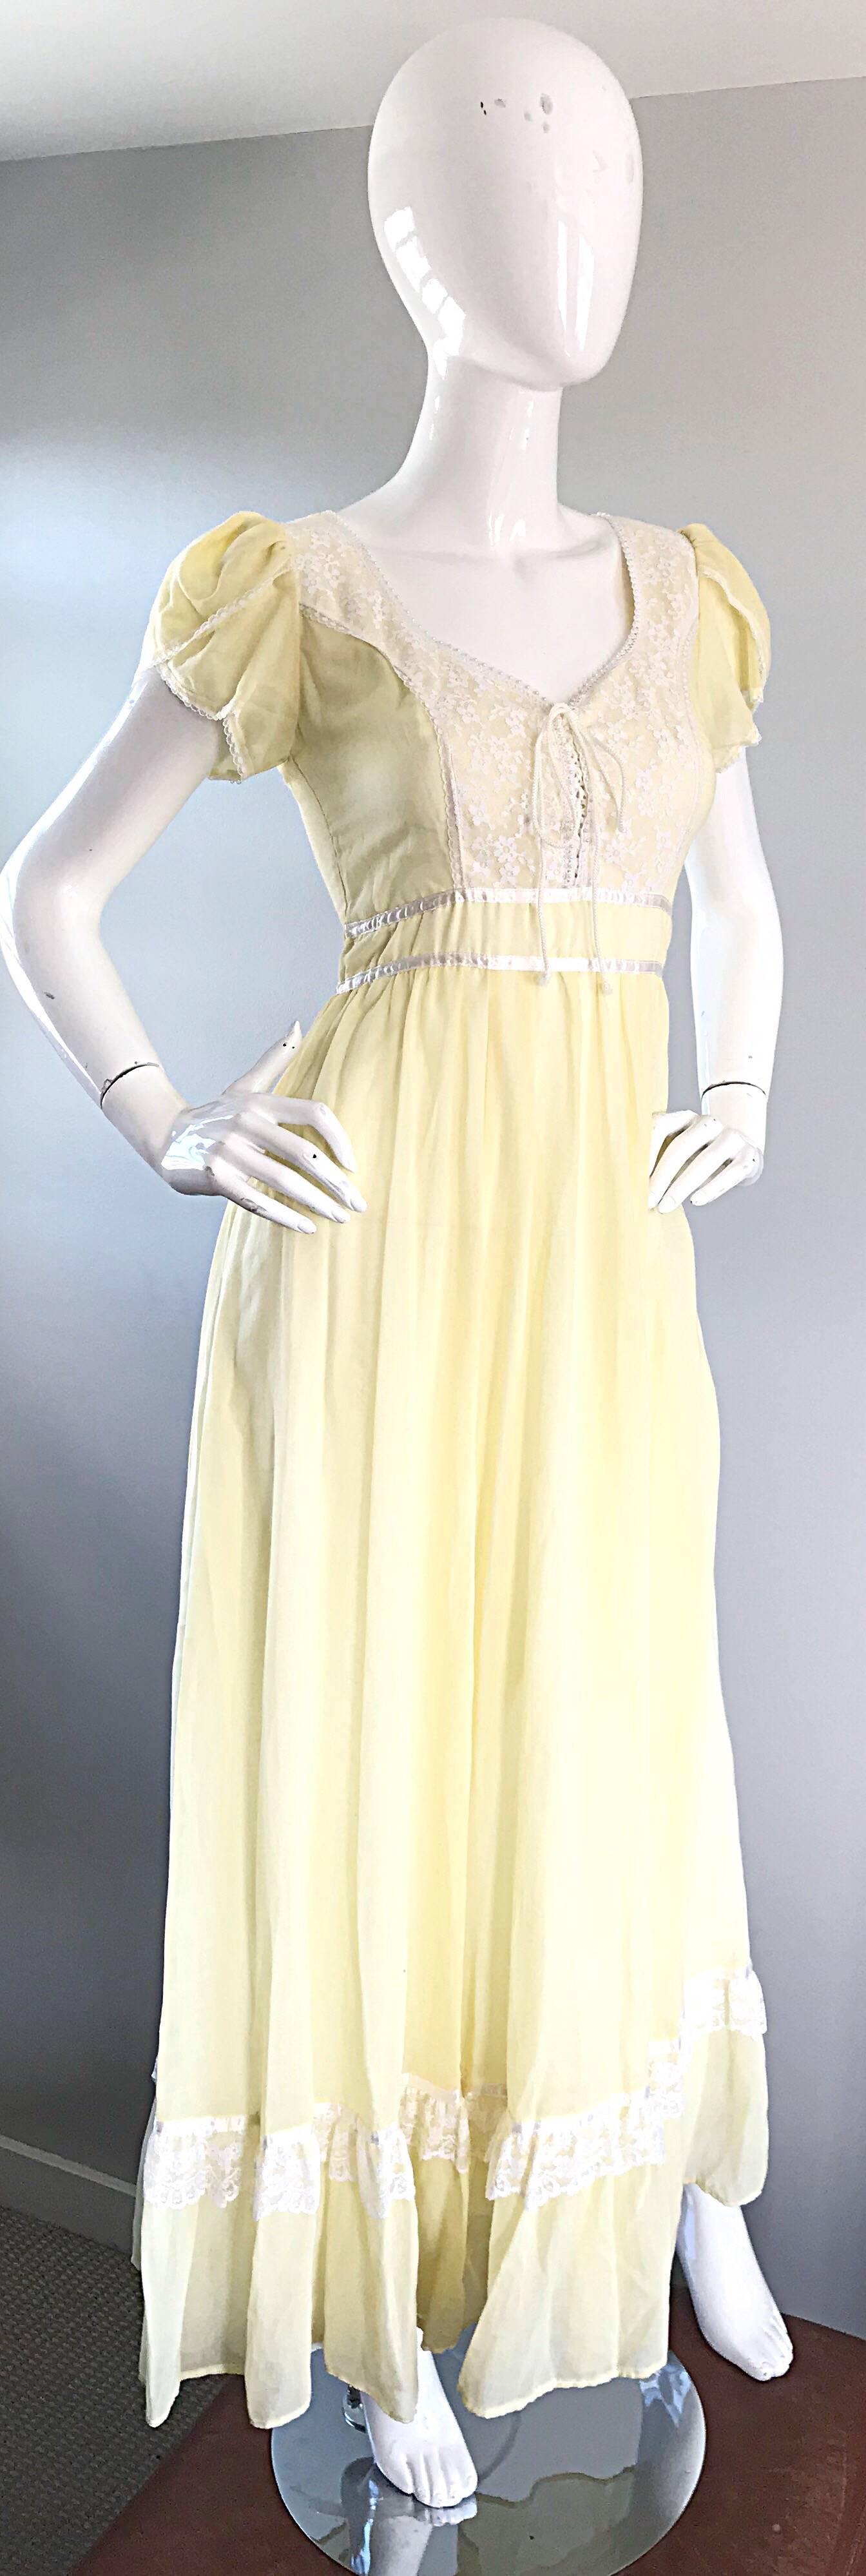 1970s Pale Yellow White Cotton Voile Pearl Encrusted Vintage 70s Boho Maxi Dress 2